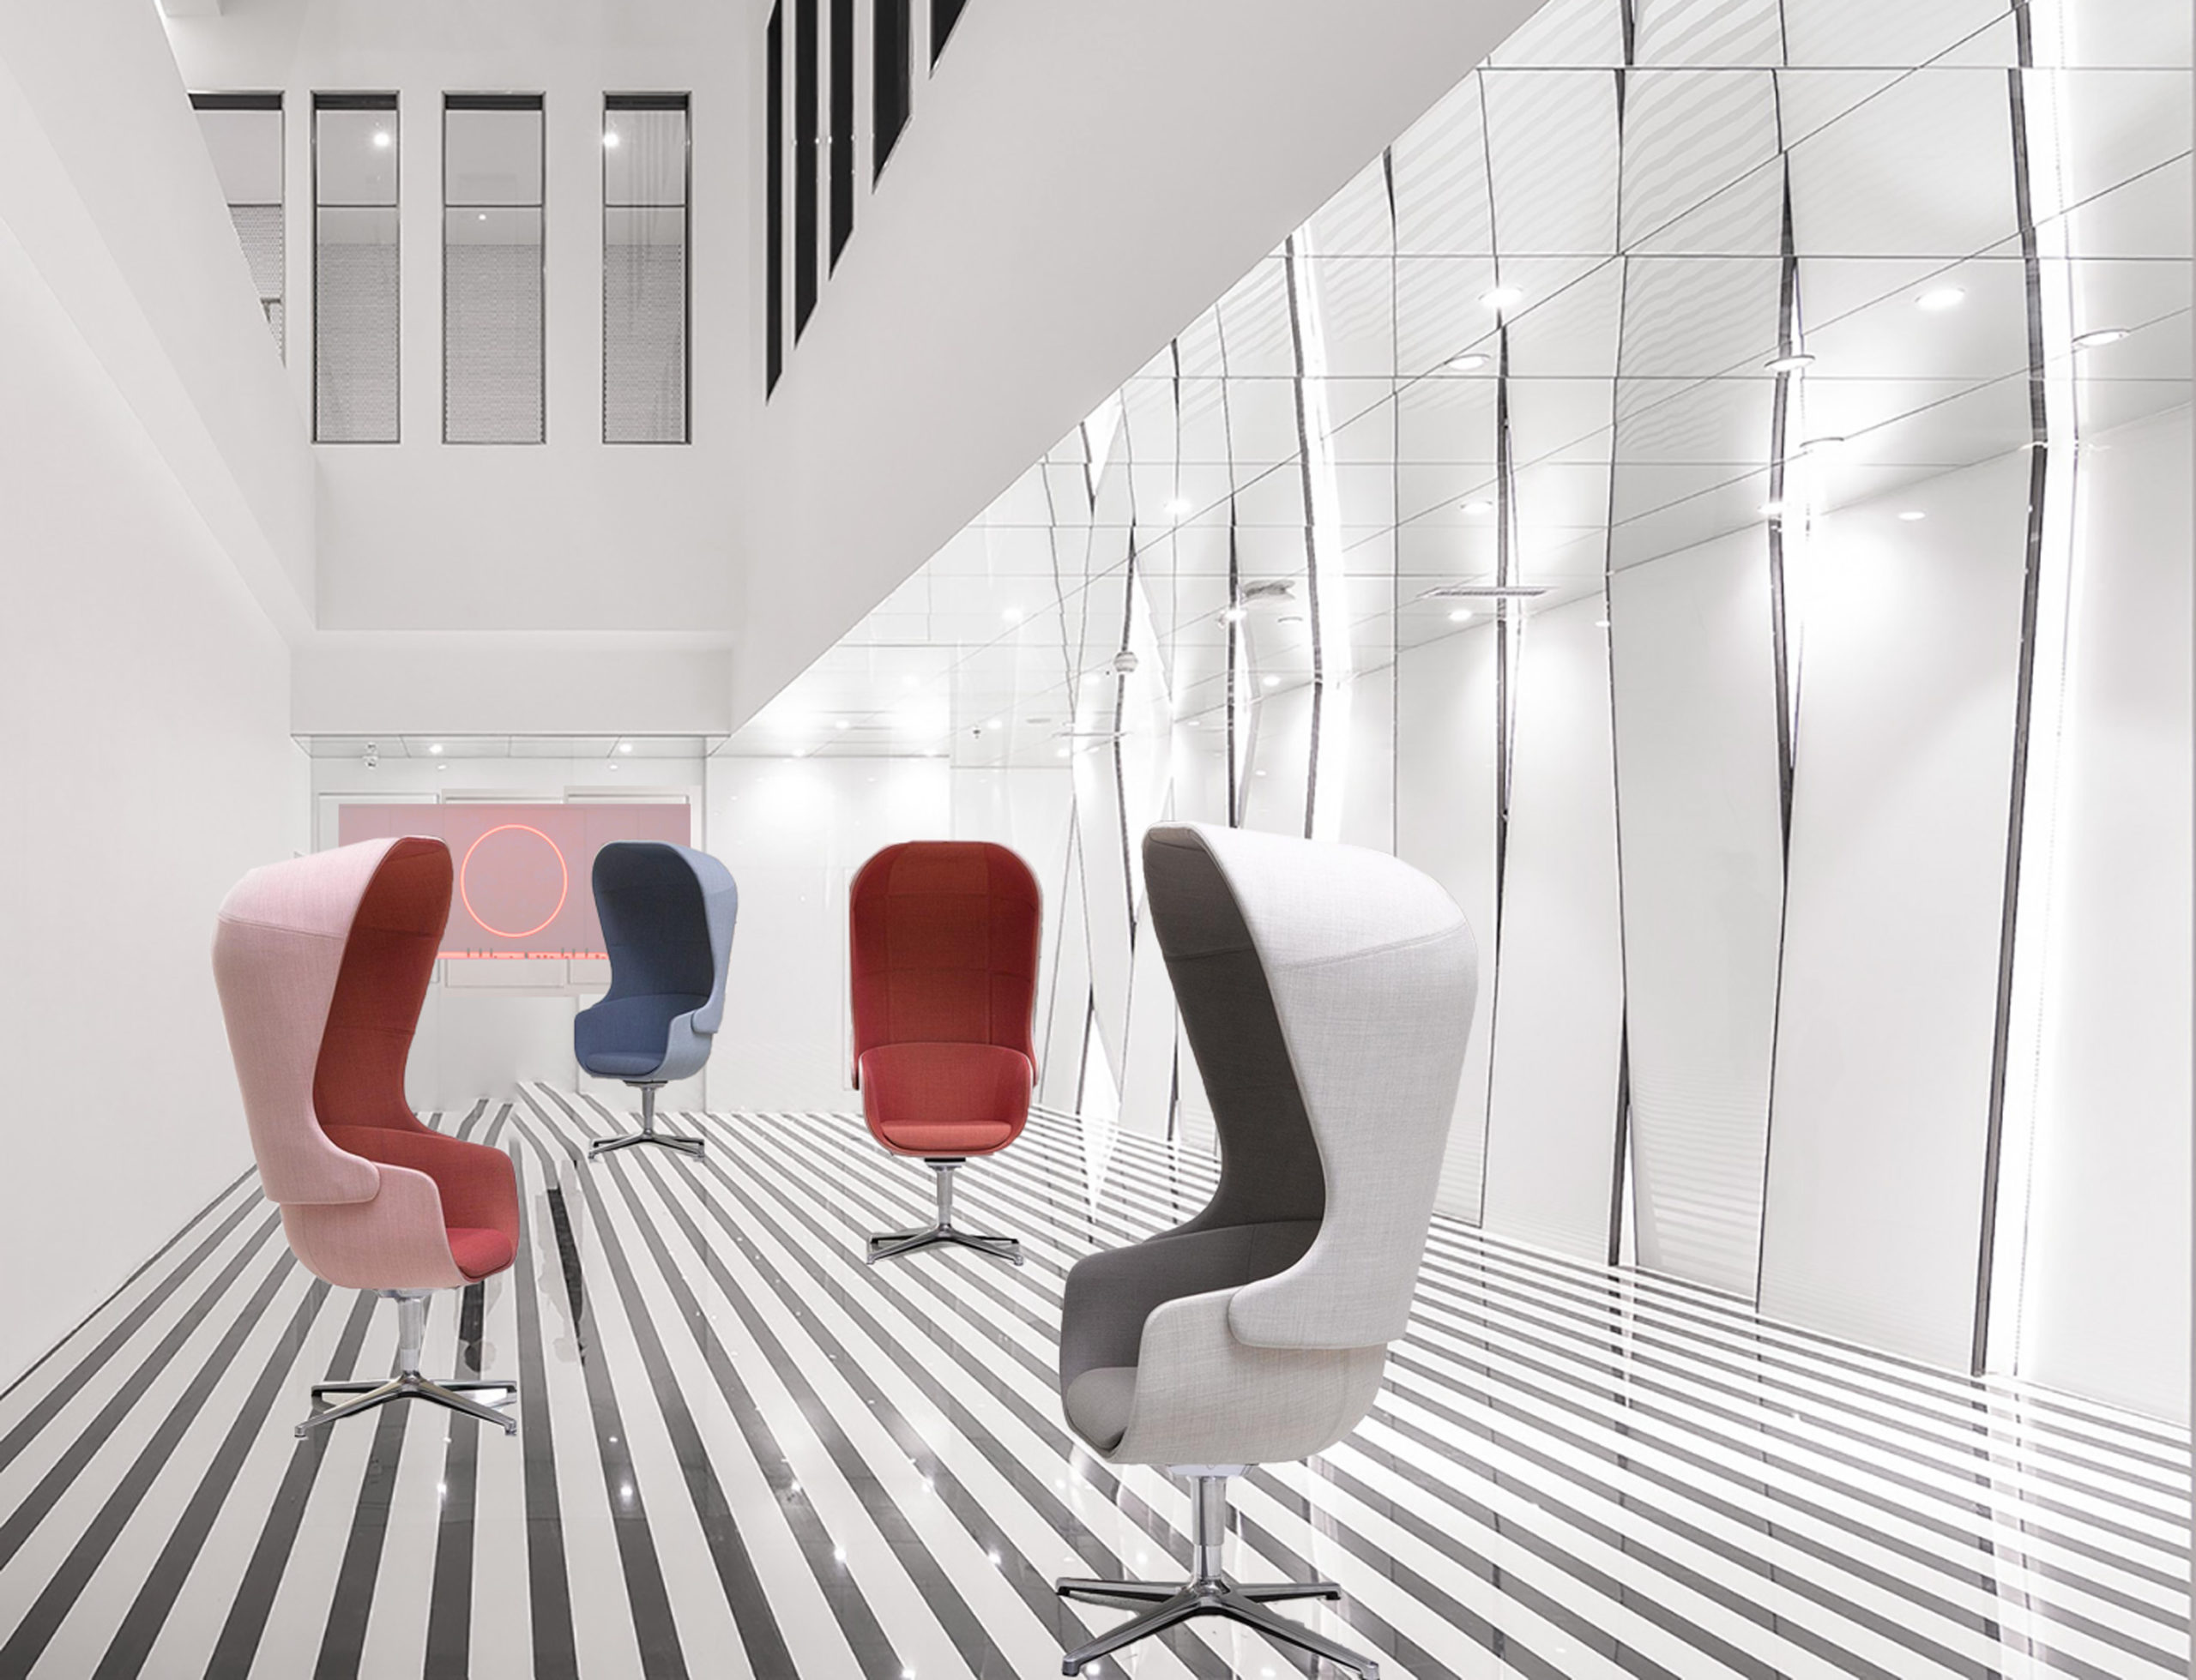 uber cool Metro Mod Pod Chair for social work office space and lobbies